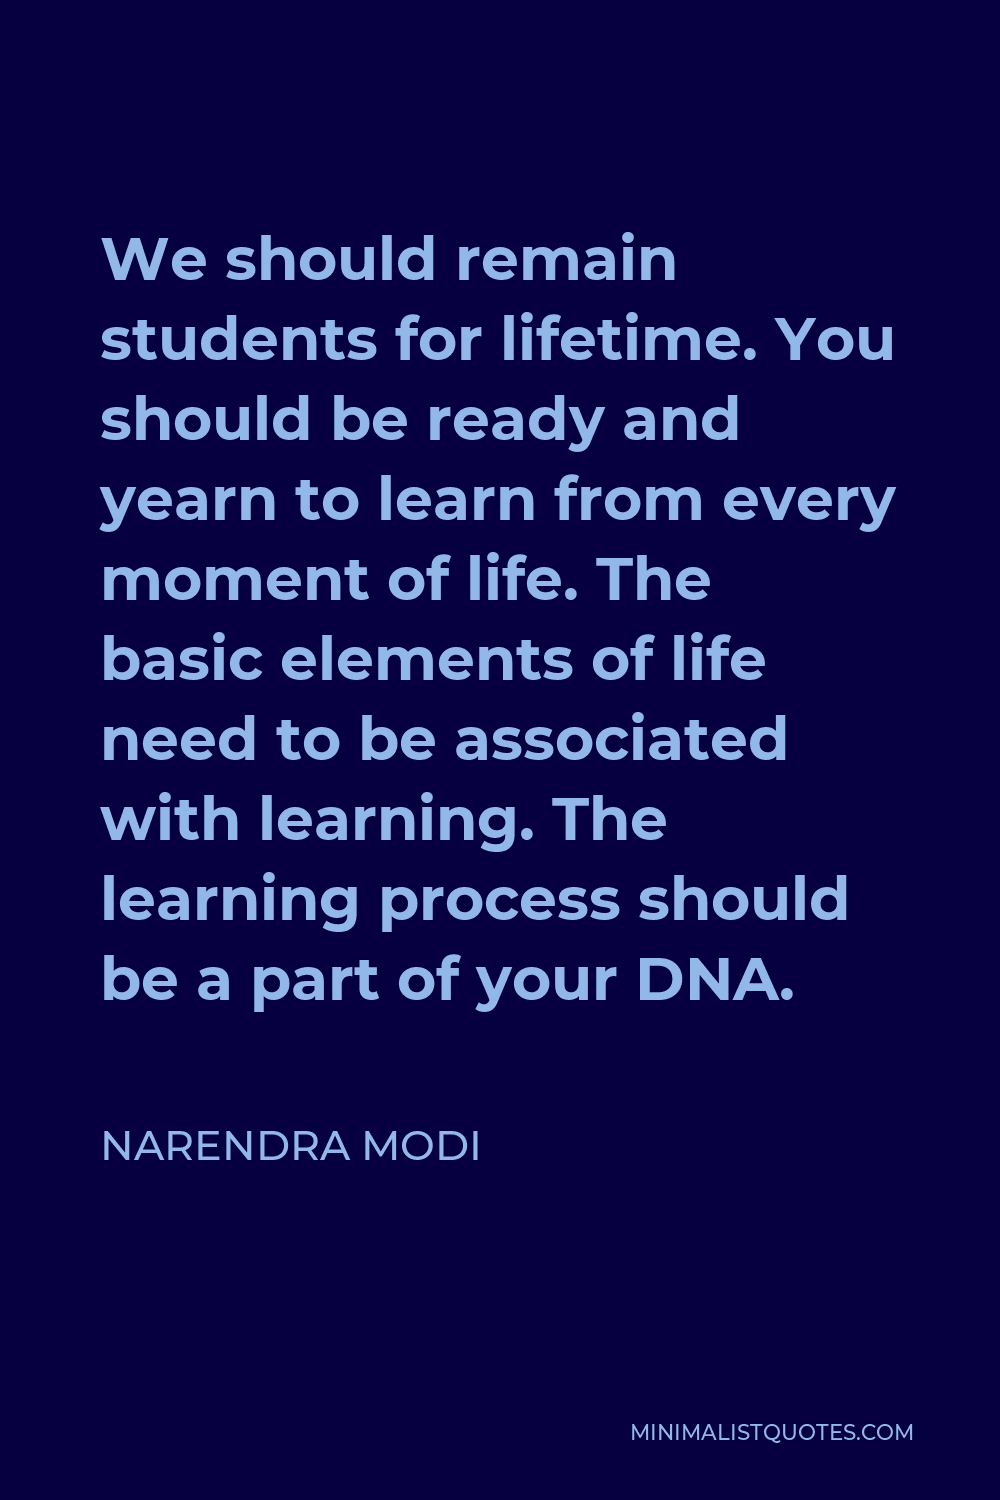 Narendra Modi Quote - We should remain students for lifetime. You should be ready and yearn to learn from every moment of life. The basic elements of life need to be associated with learning. The learning process should be a part of your DNA.